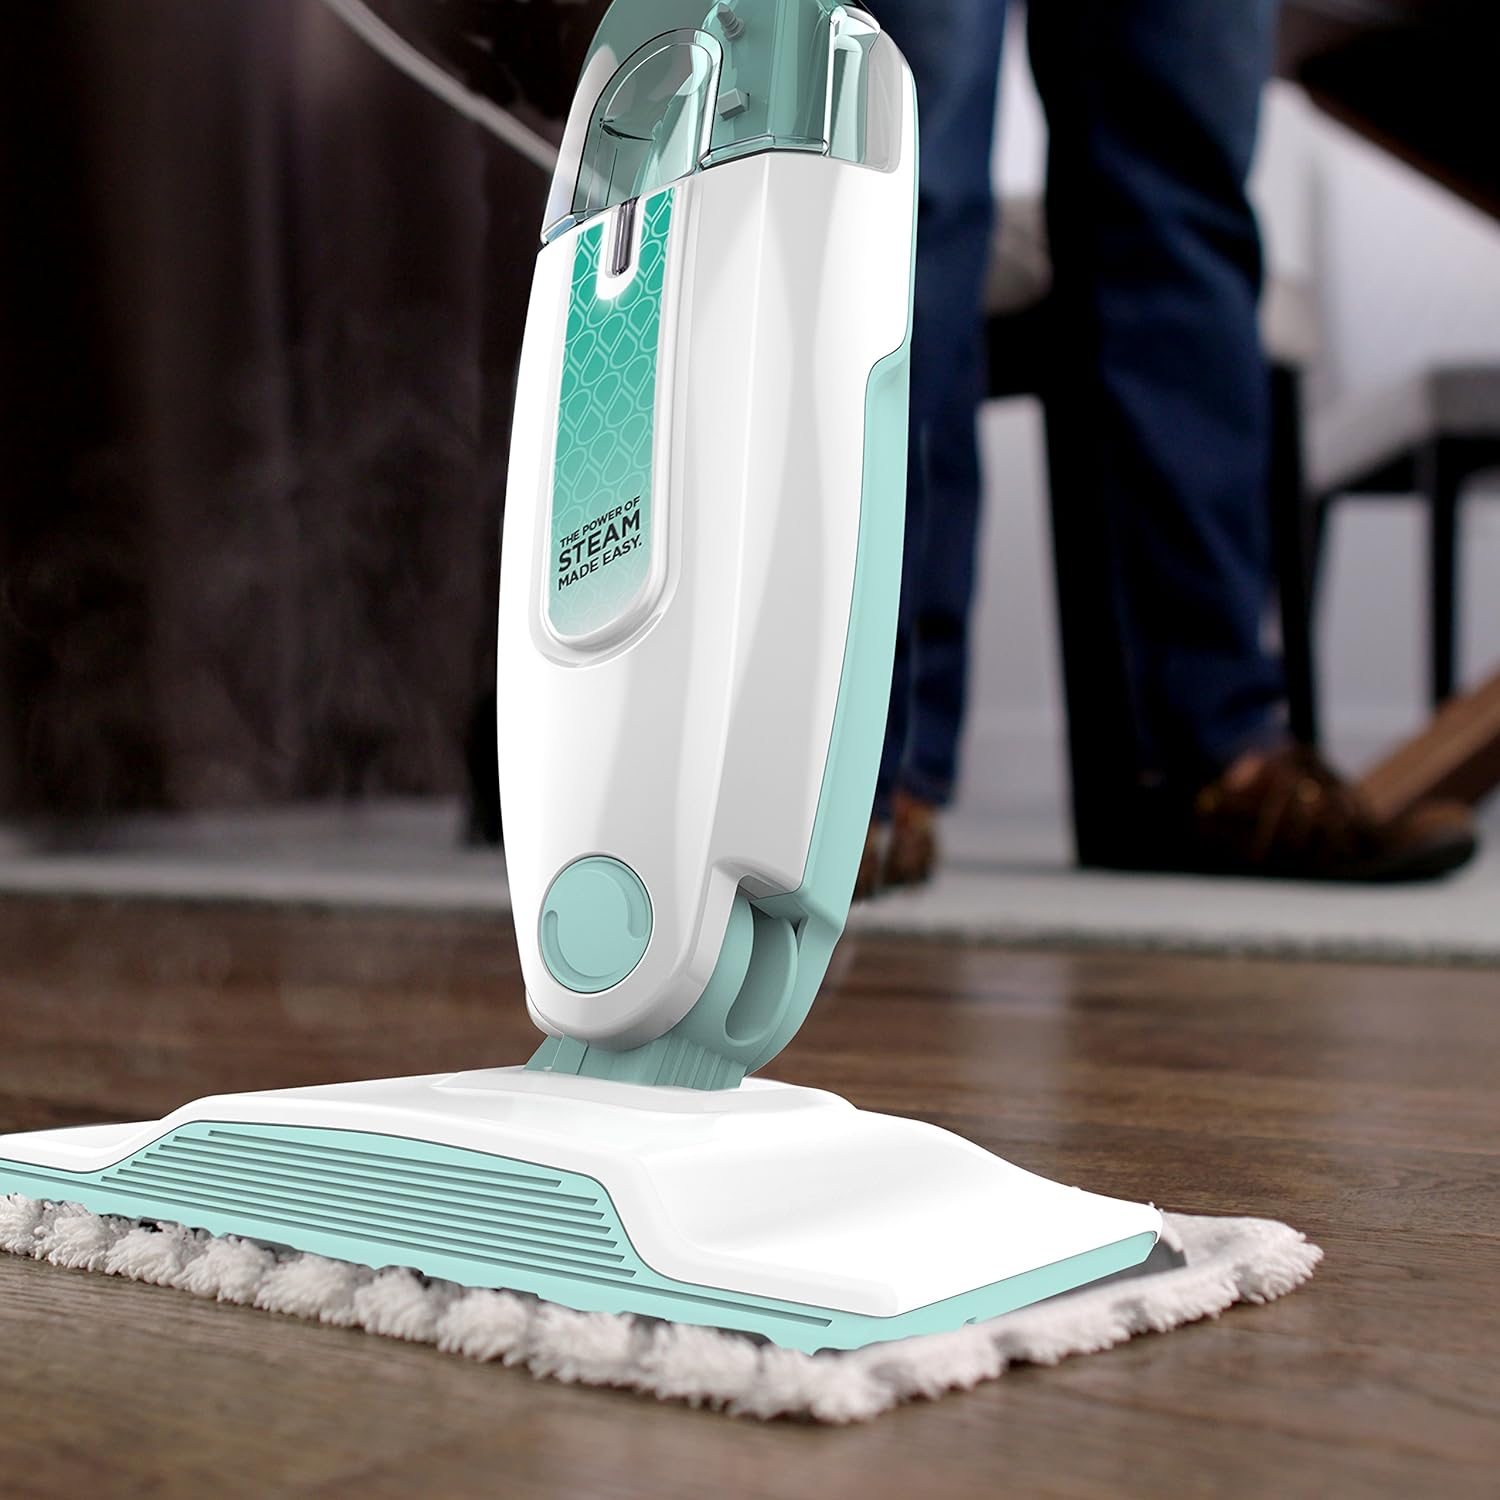 SharkNinja Shark Steam Mop Hard Floor Cleaner for Cleaning and Sanitizing with XL Removable Water Tank and 18-Foot Power Cord (S1000A),Whi